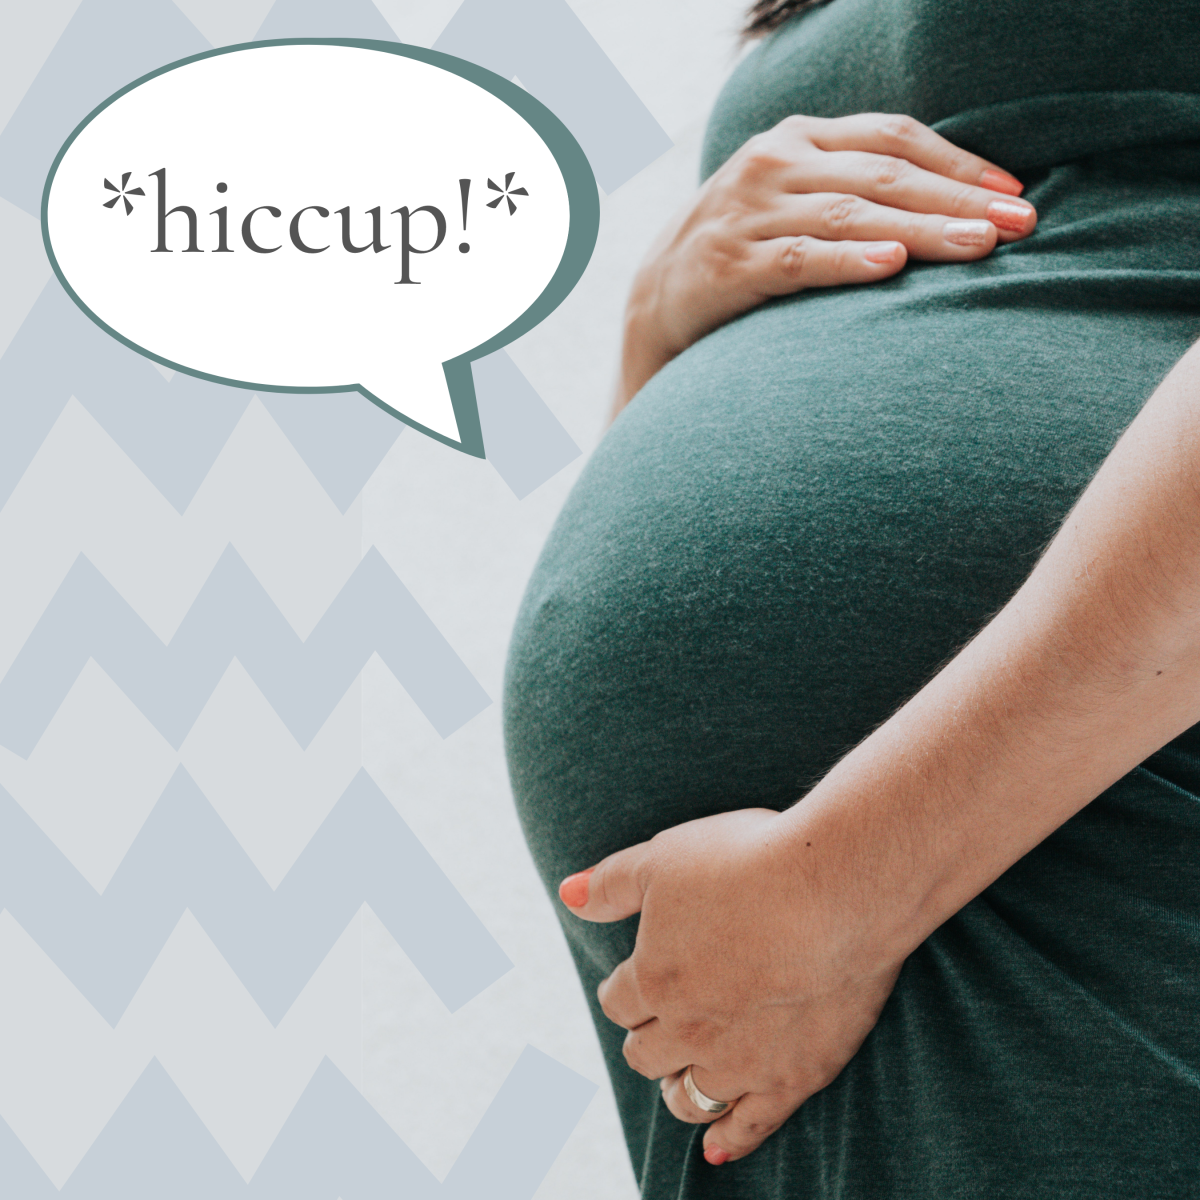 You might feel your baby hiccup. What's causing it? Is there cause for concern?